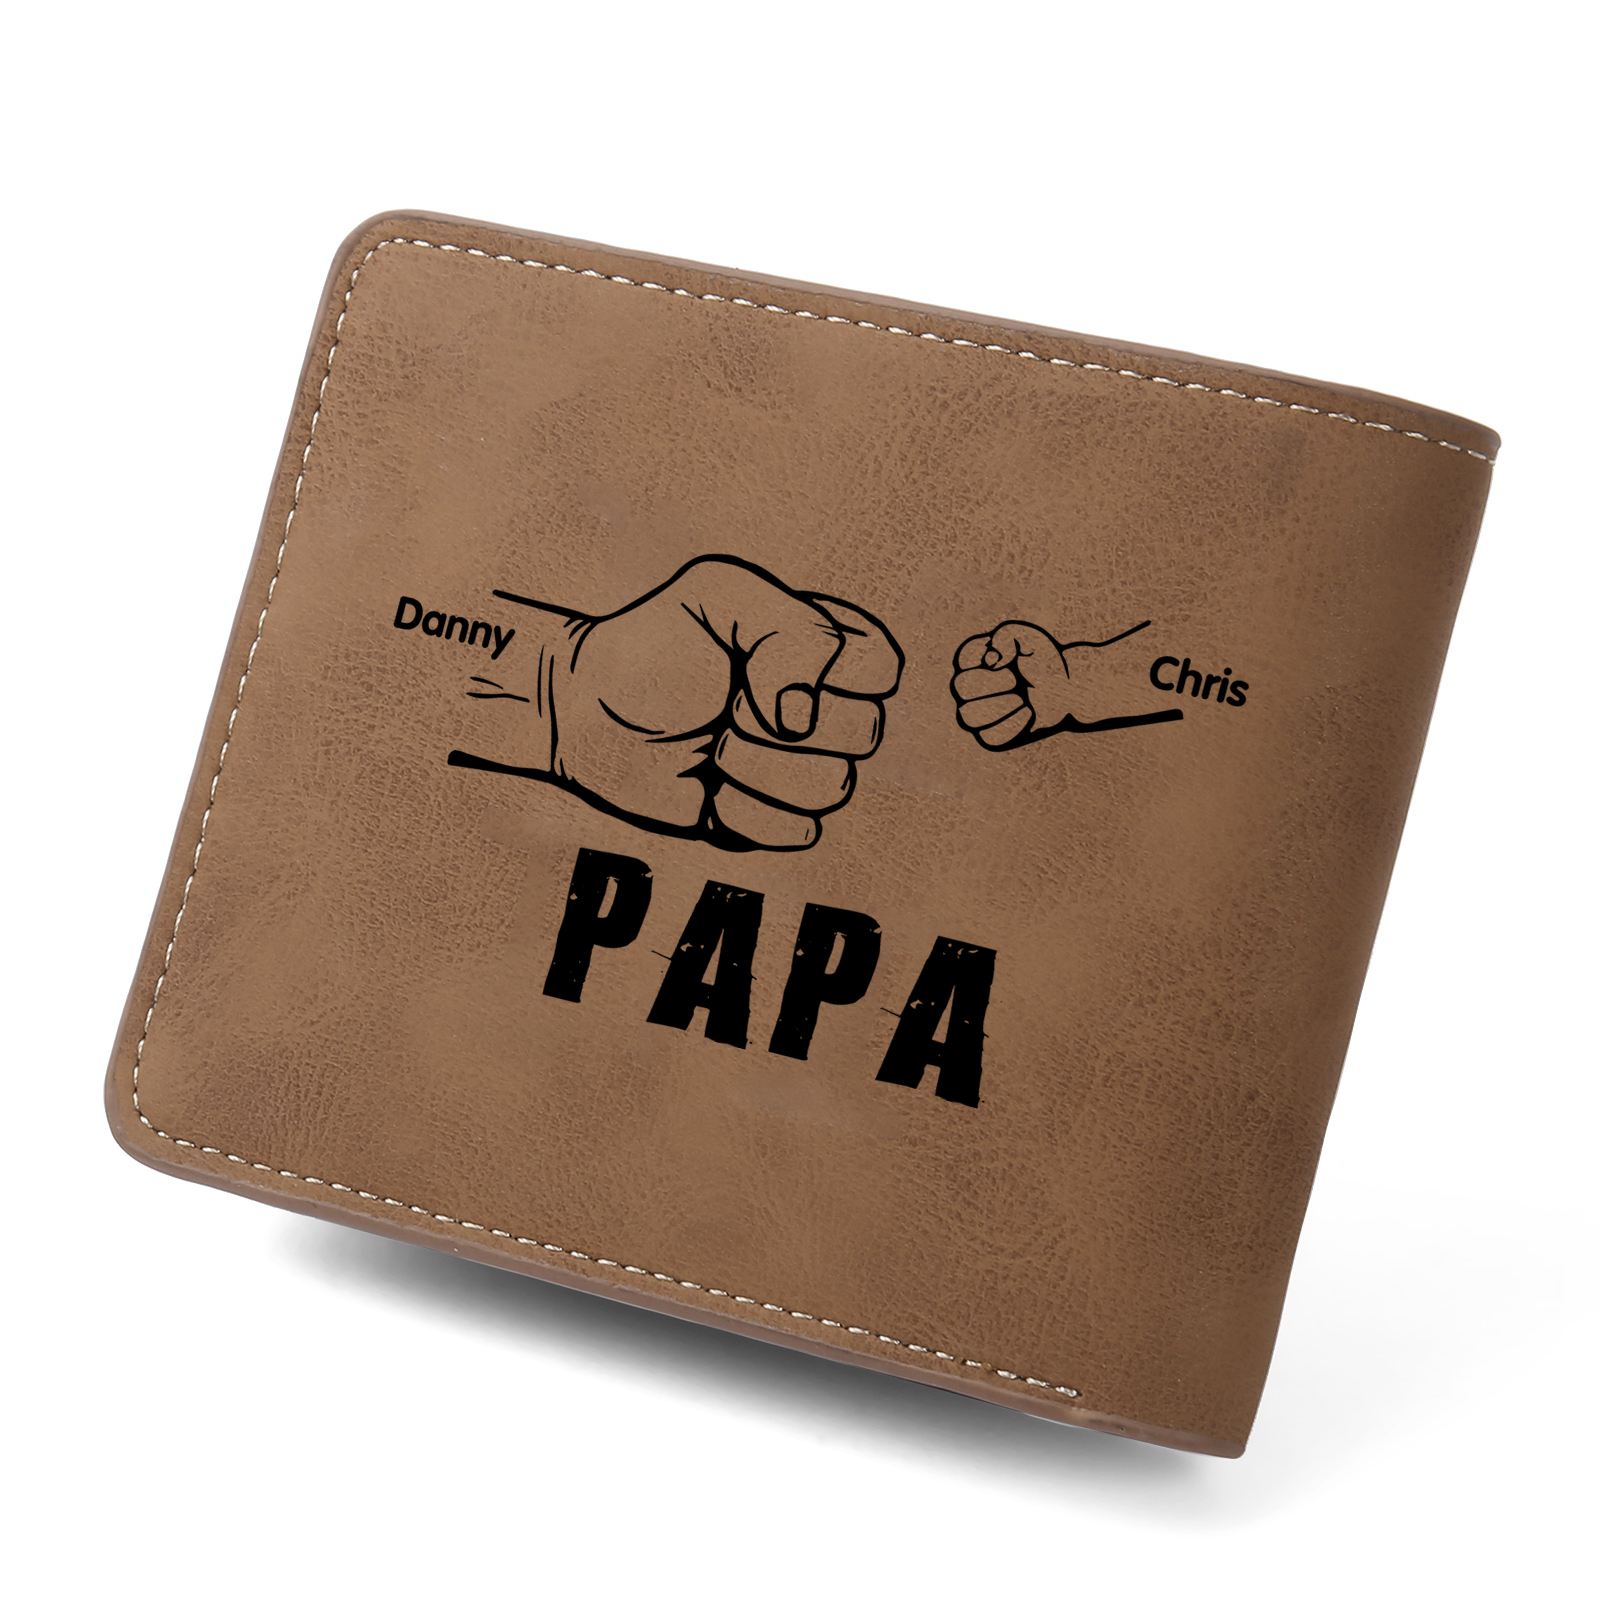 2-Names Personalized Leather Men's wallet With Card Slot Engraved With Name And Photo For Papa As a Father's Day Unique Gift